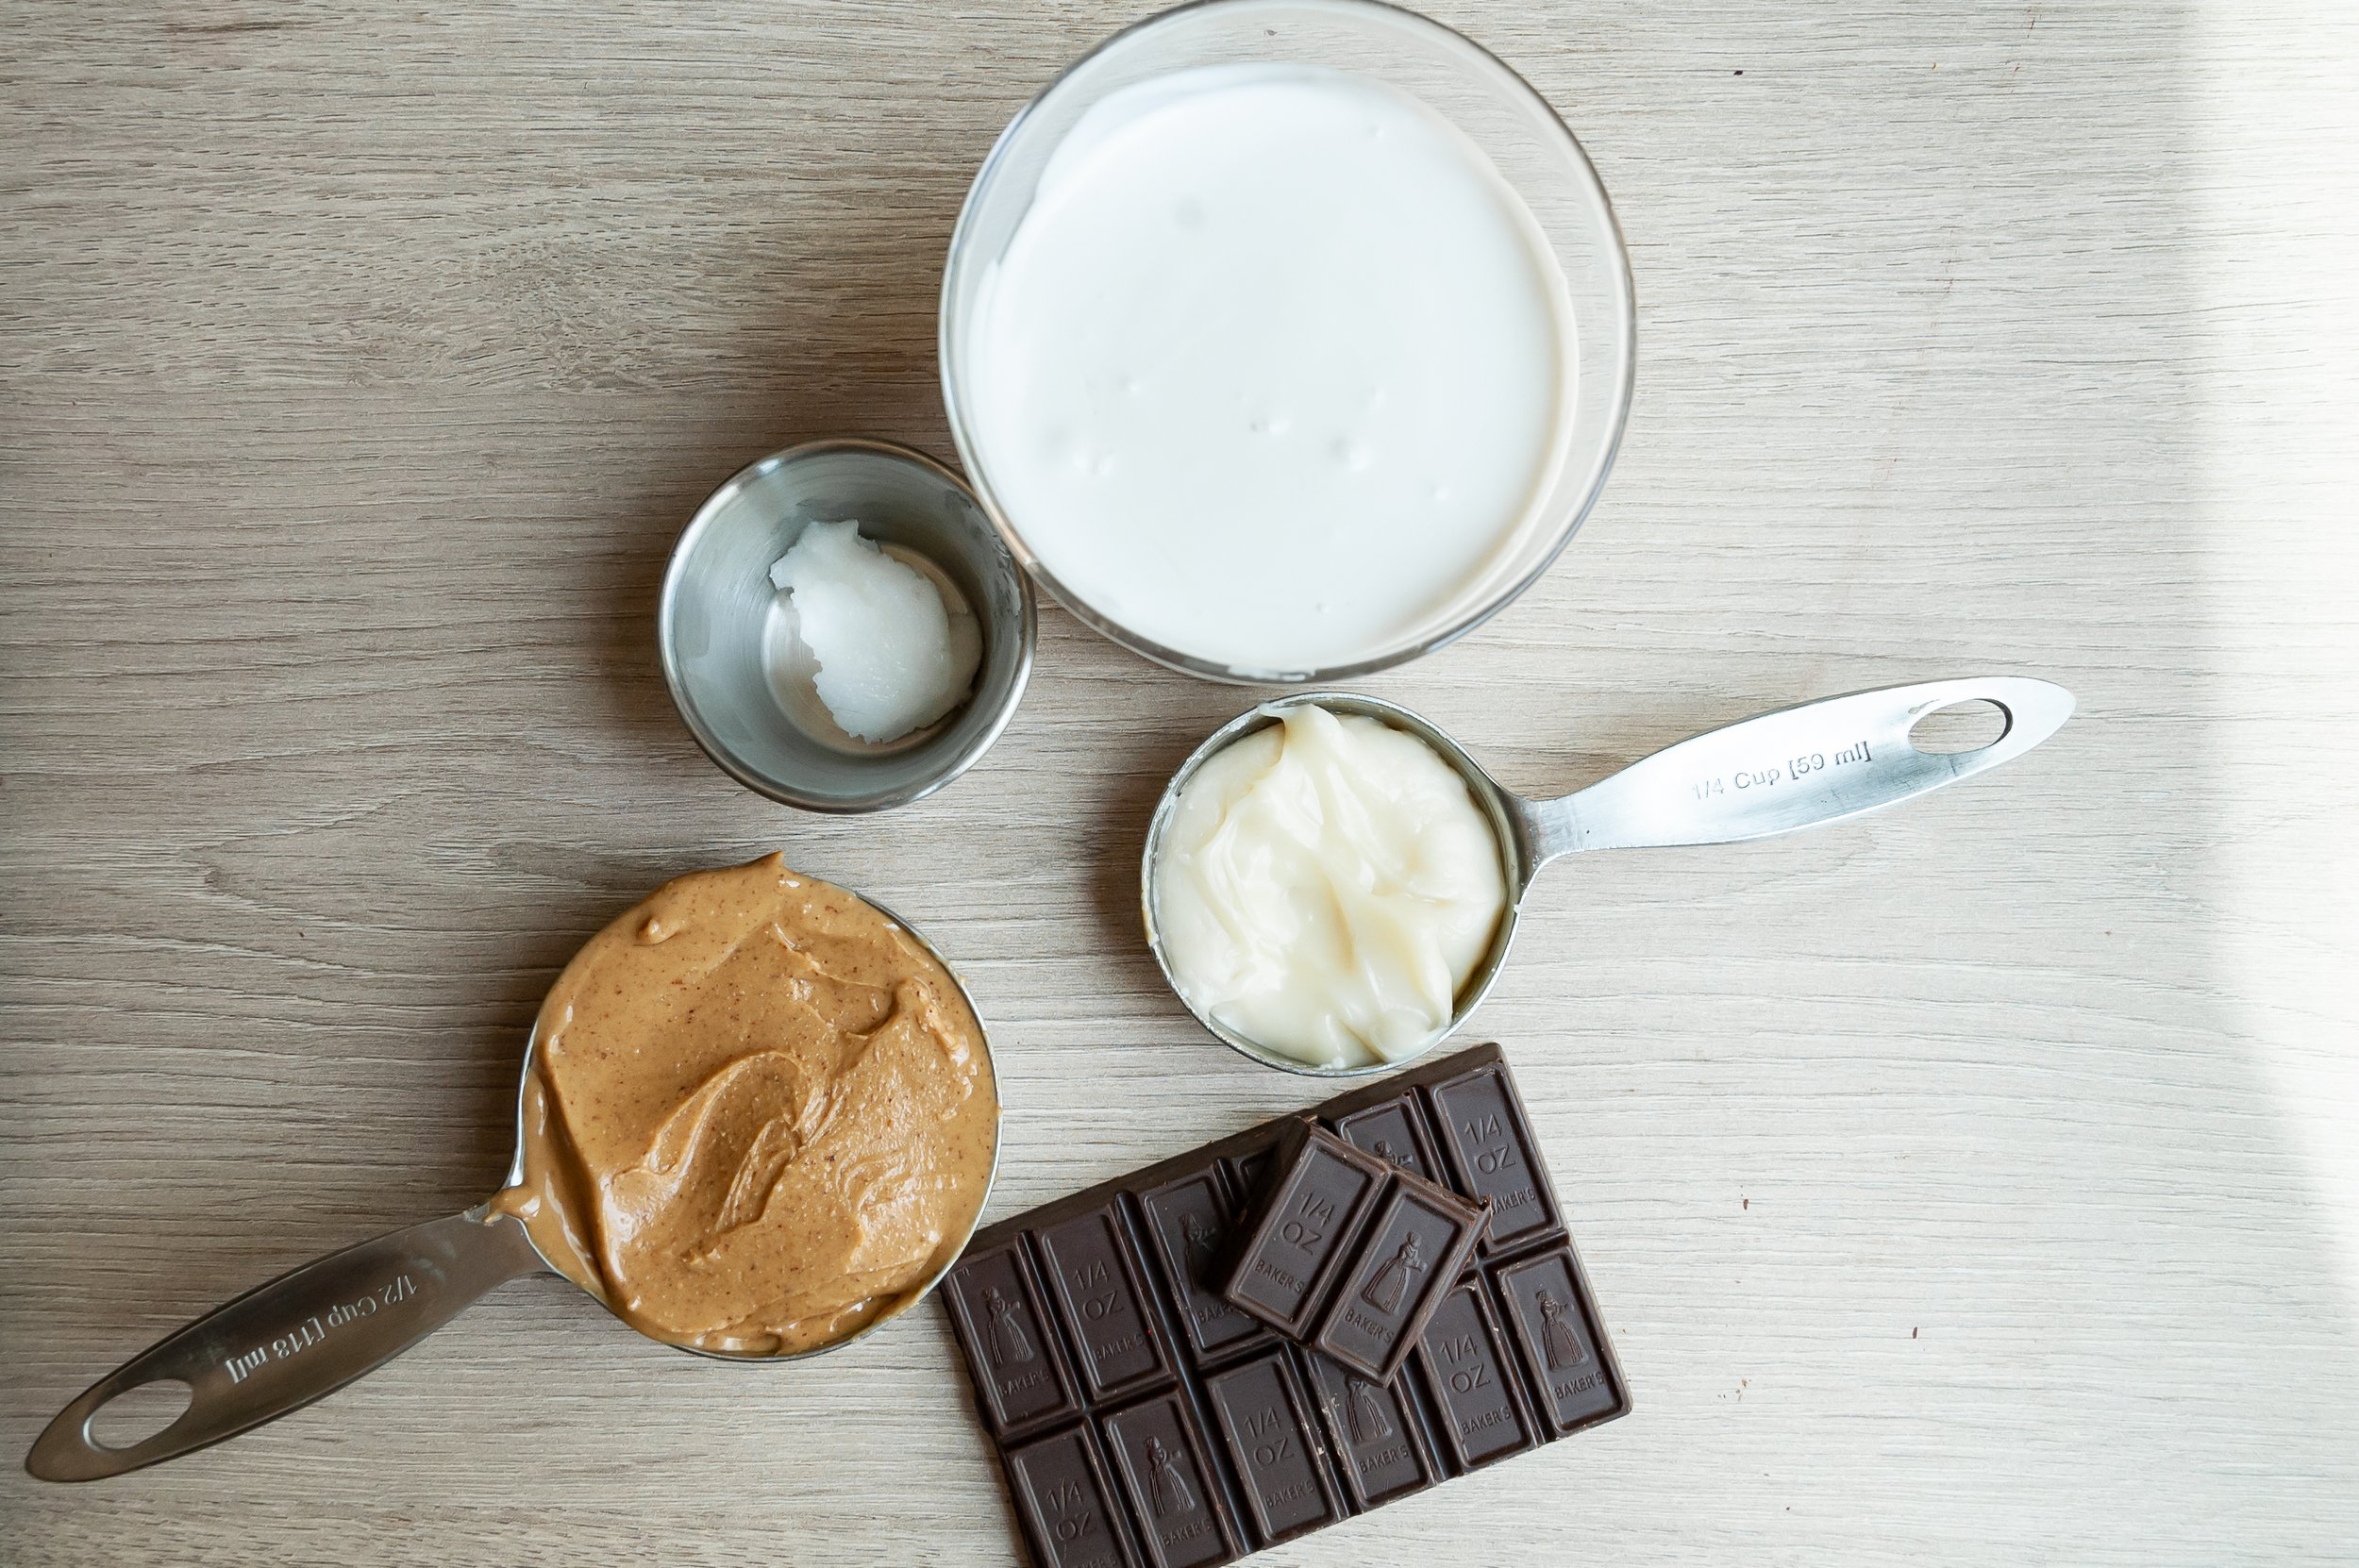 Ingredients For Peanut Butter Ice Cream Bars